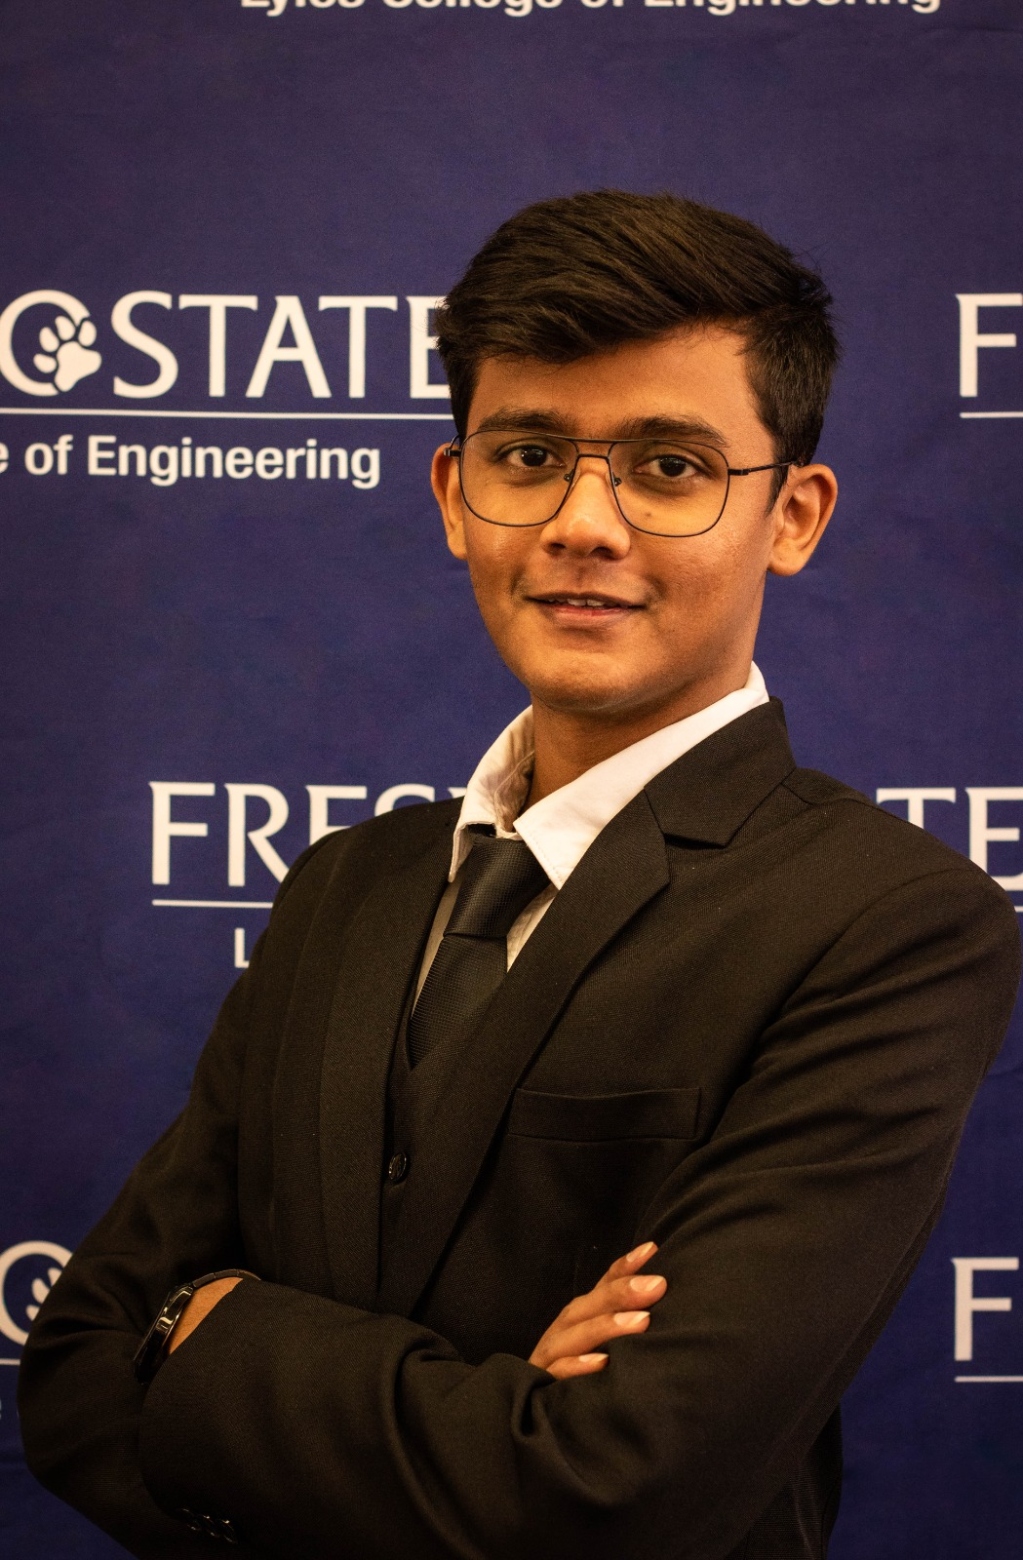 Ninad posing in black suit in front of Fresno State backdrop